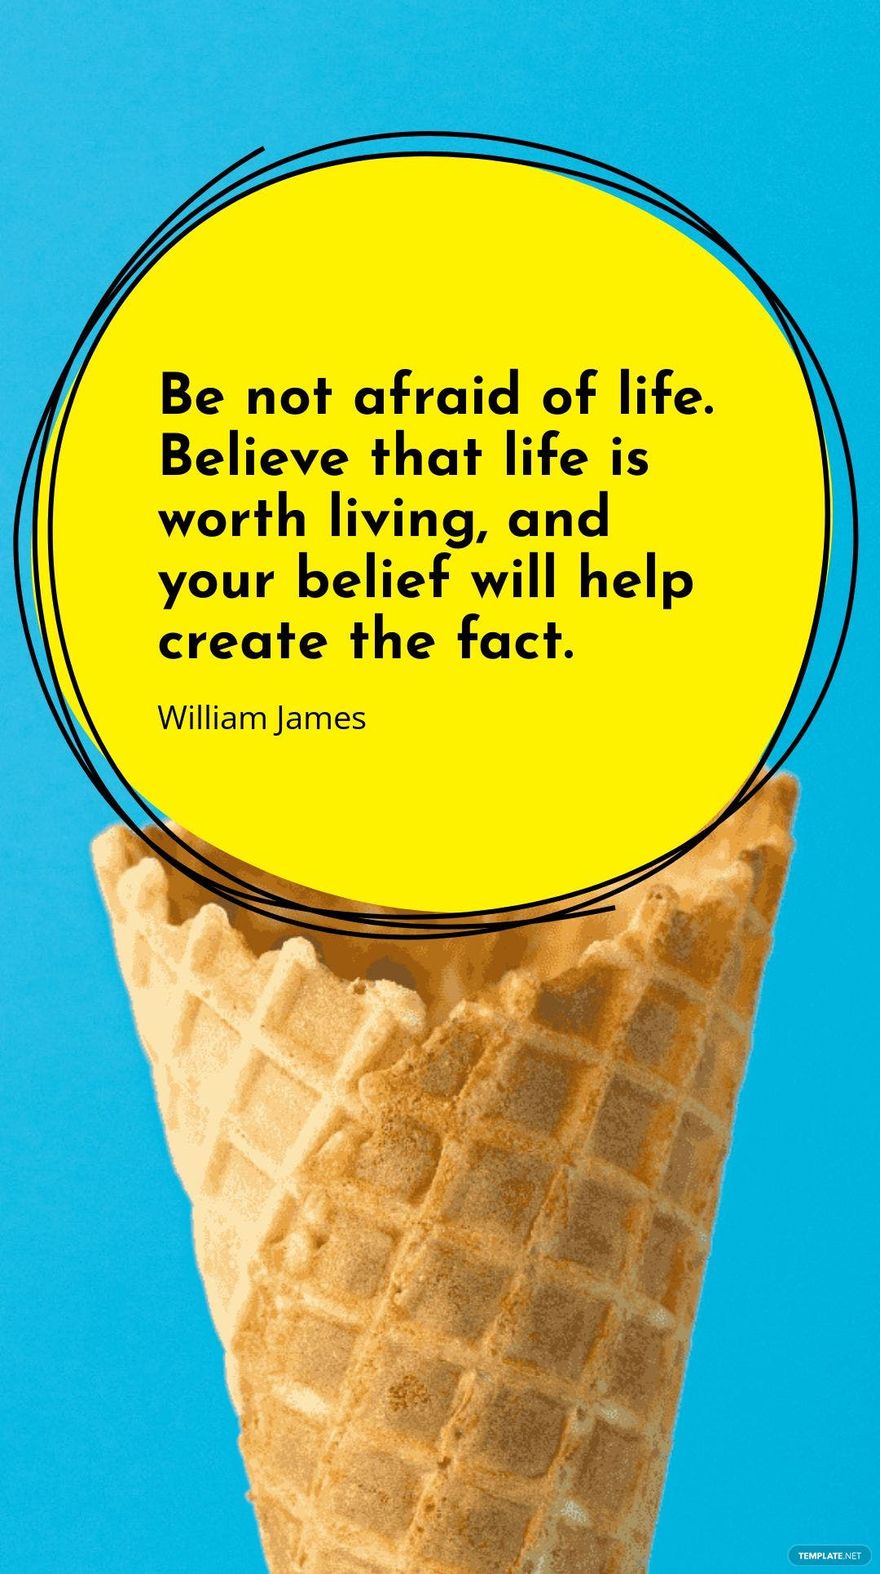 William James - Be not afraid of life. Believe that life is worth living, and your belief will help create the fact.